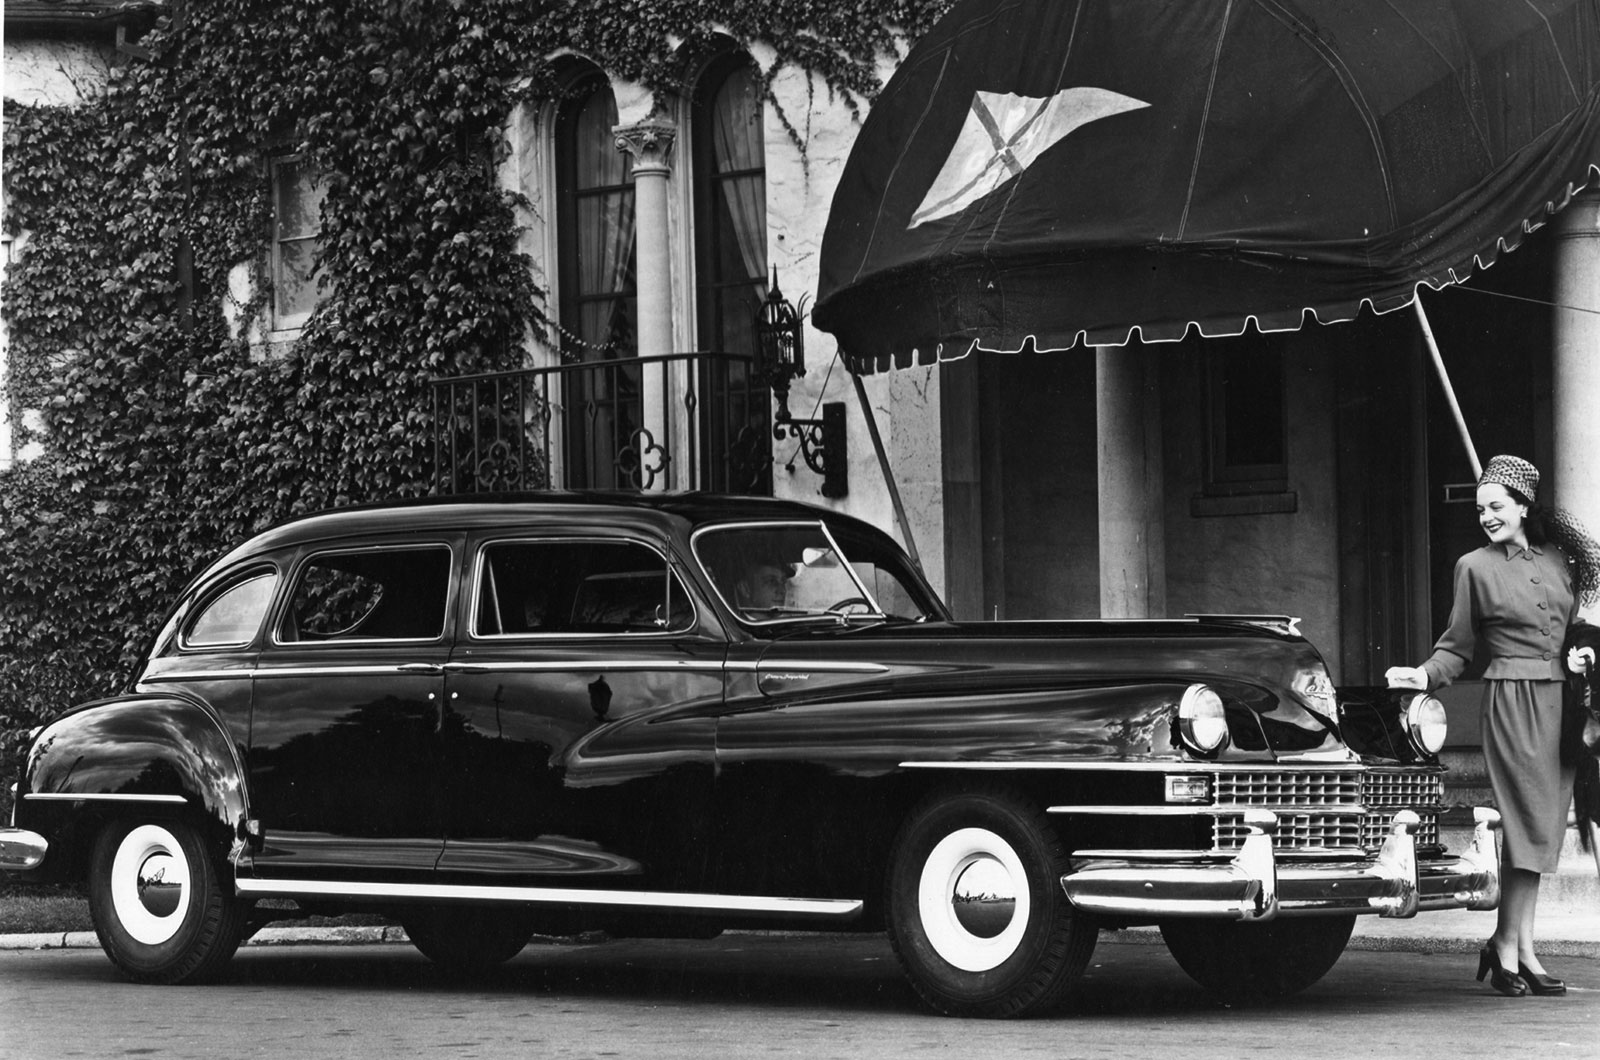 <p>It would be another decade before most car makers would discover disc brakes but as early as 1948 the <strong>Chrysler Crown Imperial</strong> featured them, on all four wheels. Even today some economy cars still feature disc brakes only at the front. Disc brakes have a number of advantages over drum brakes; chiefly, they have more stopping power.</p><p><strong>GROUNDBREAKER SCORE: 8 </strong>– a vital improvement.</p>